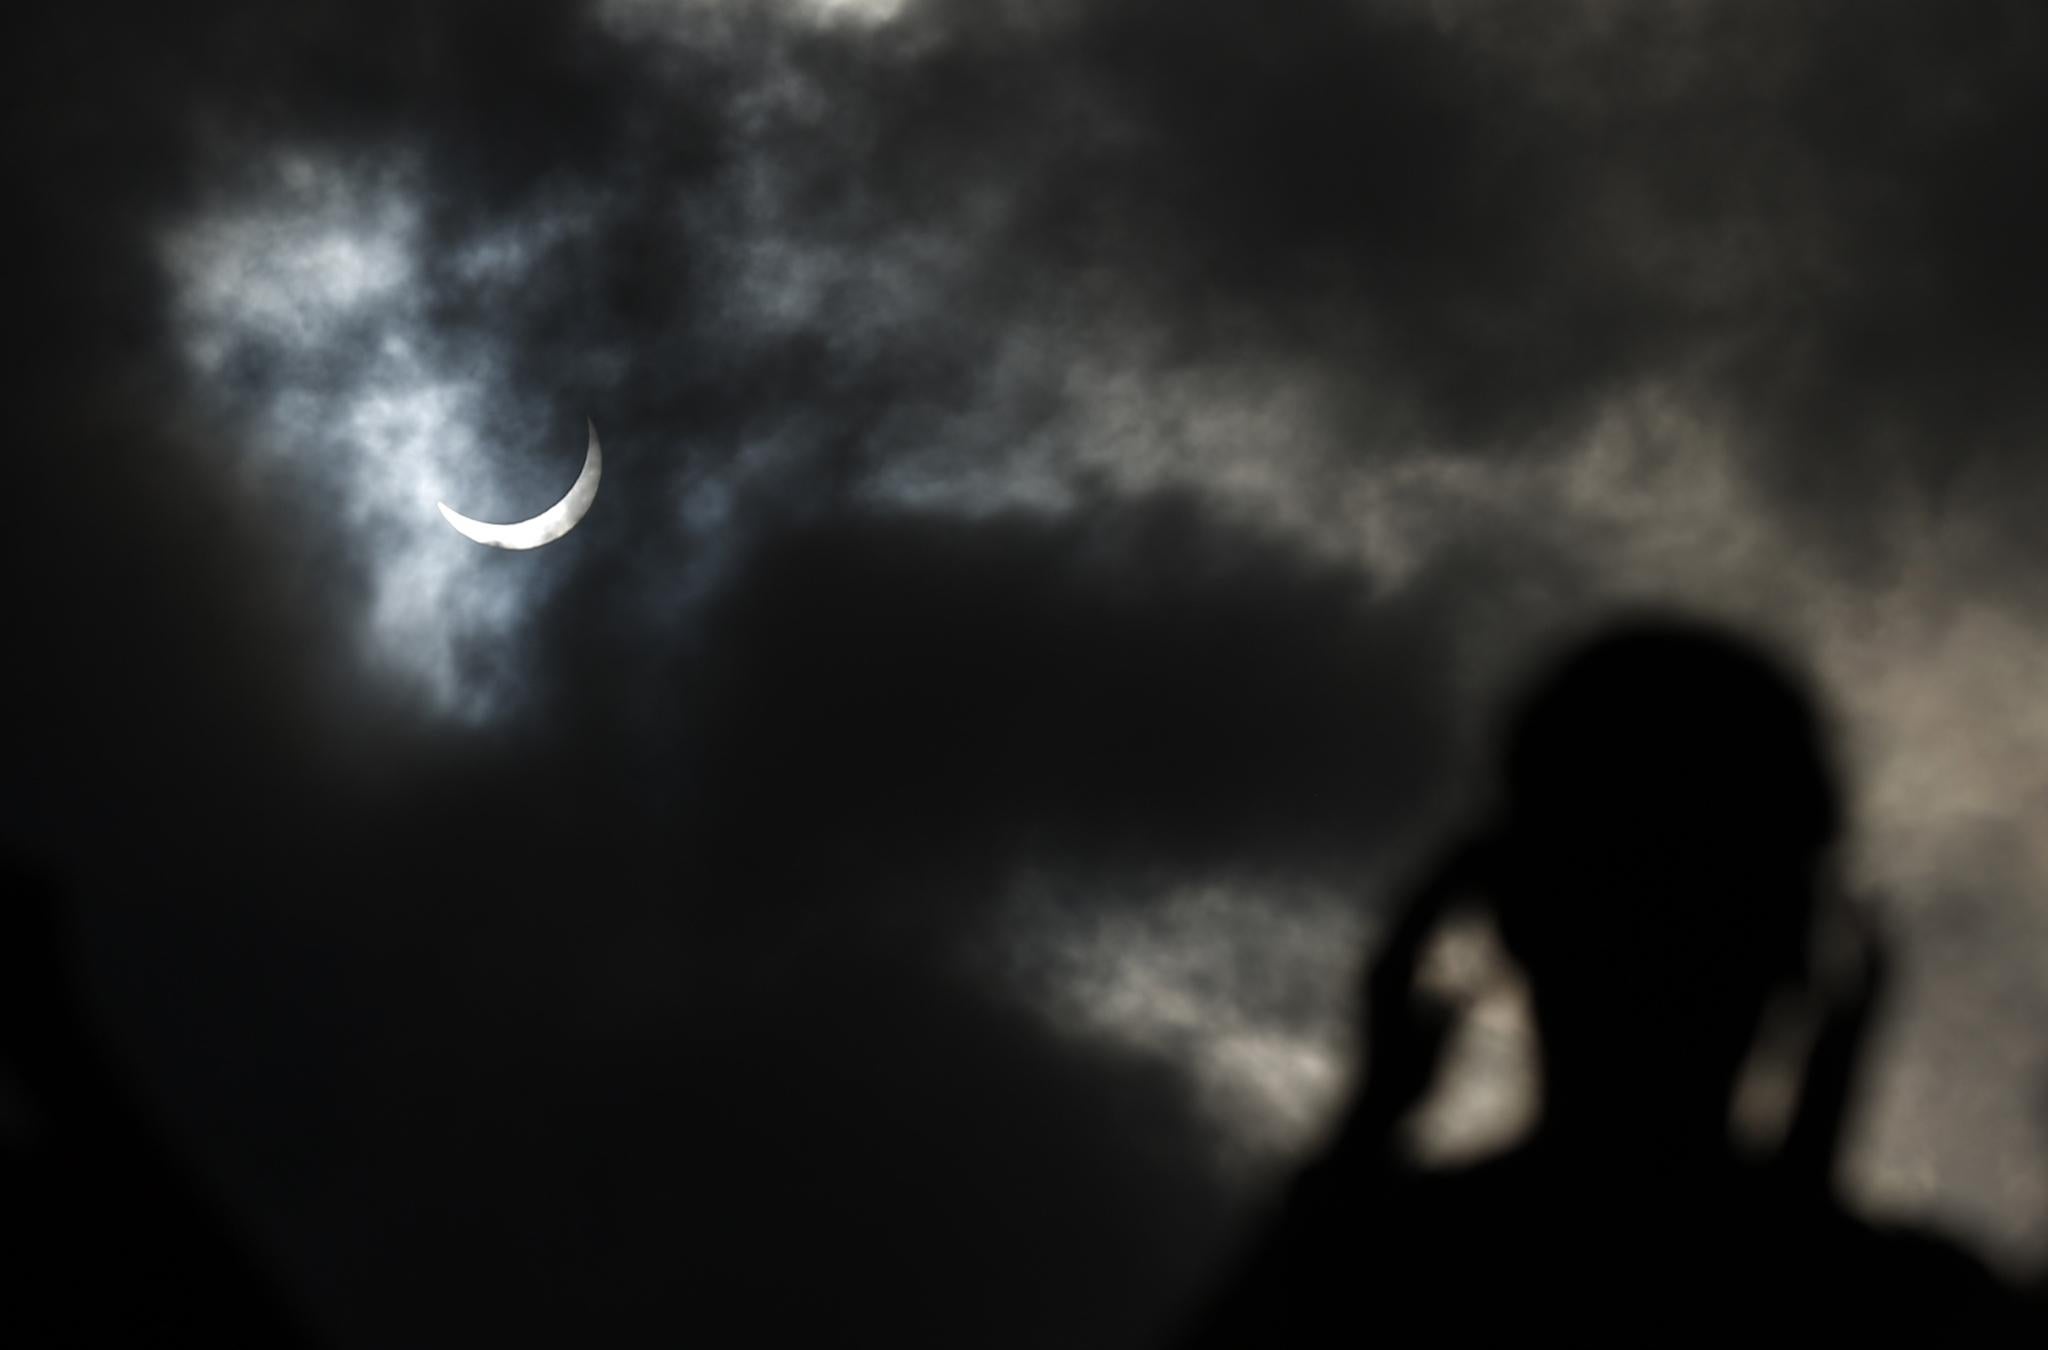 Counterfeit goods flooded the US market ahead of the first coast-to-coast solar eclipse in the country for a century